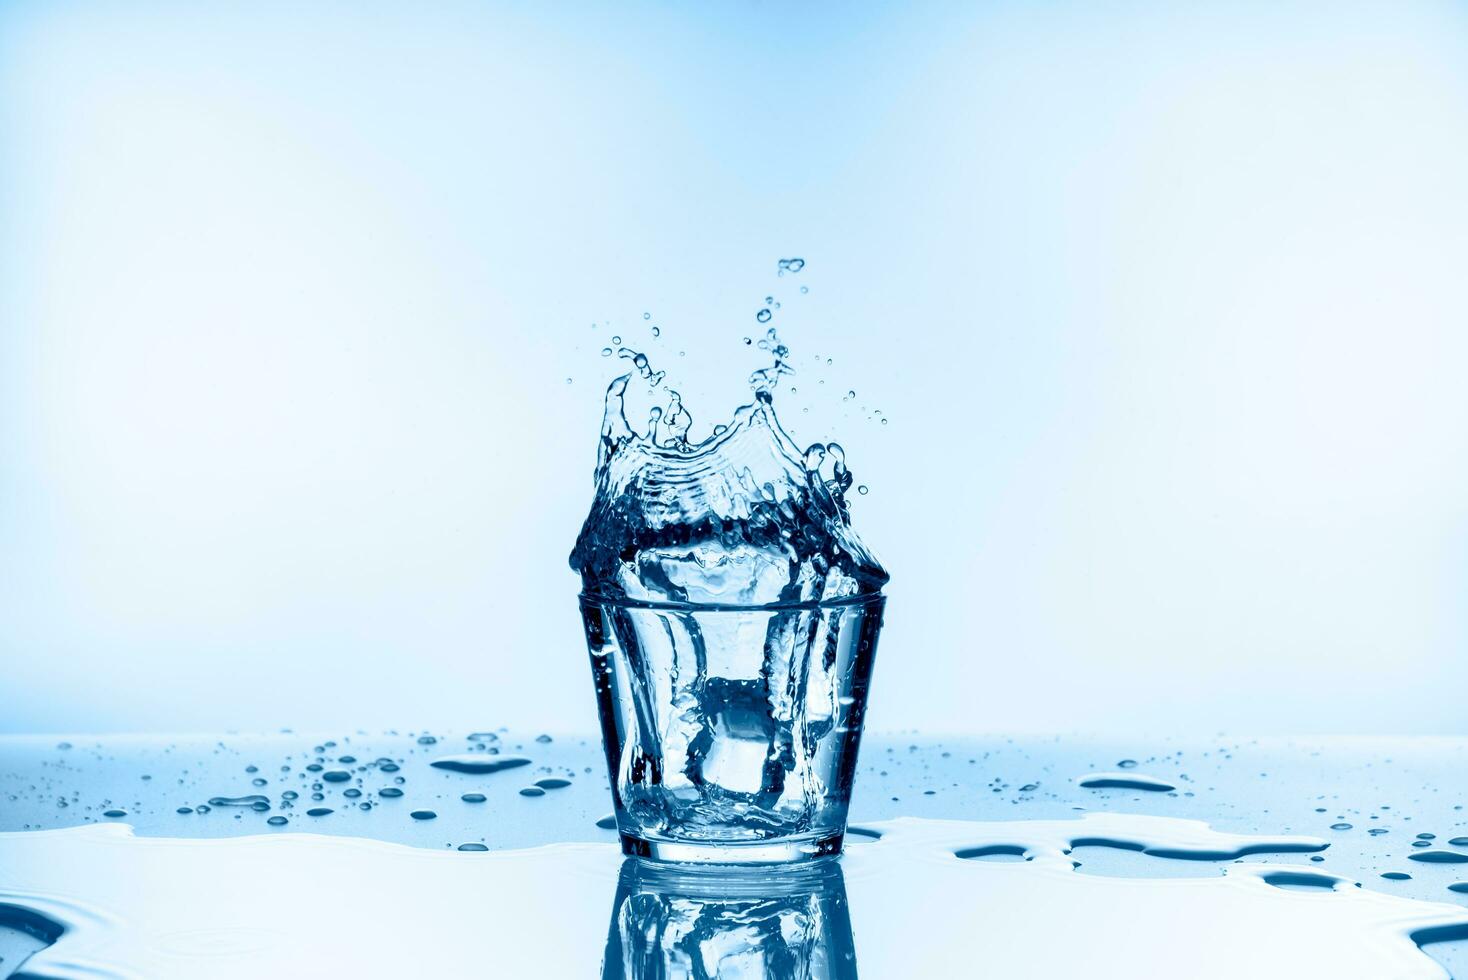 Ice that fell into the glass with water splashing from glass isolated on blue background photo